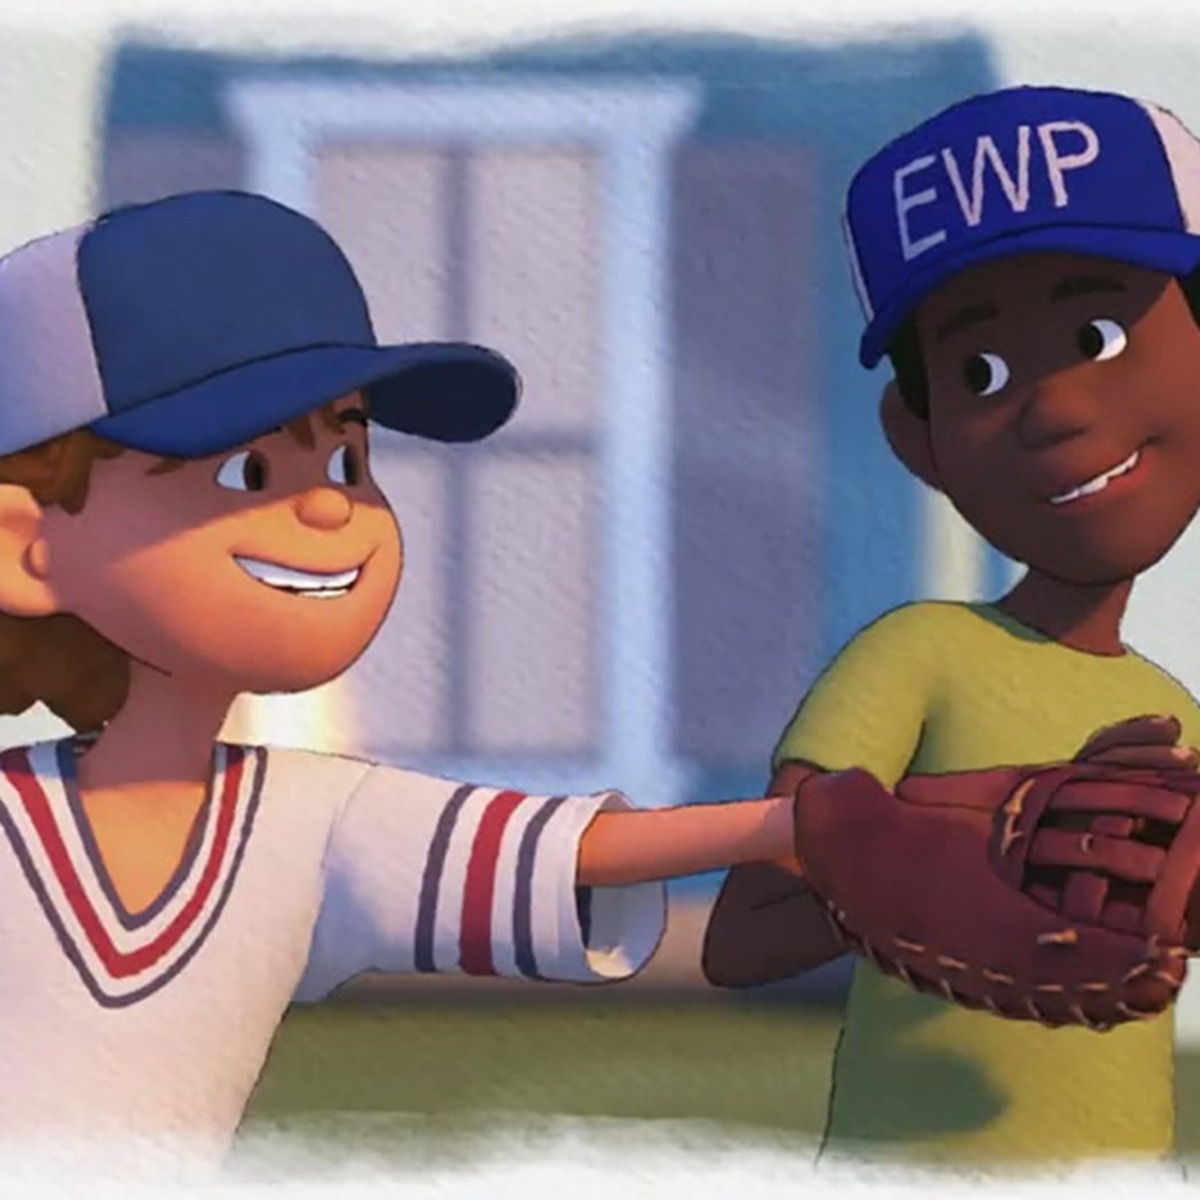 an animation still of two boys playing baseball together.